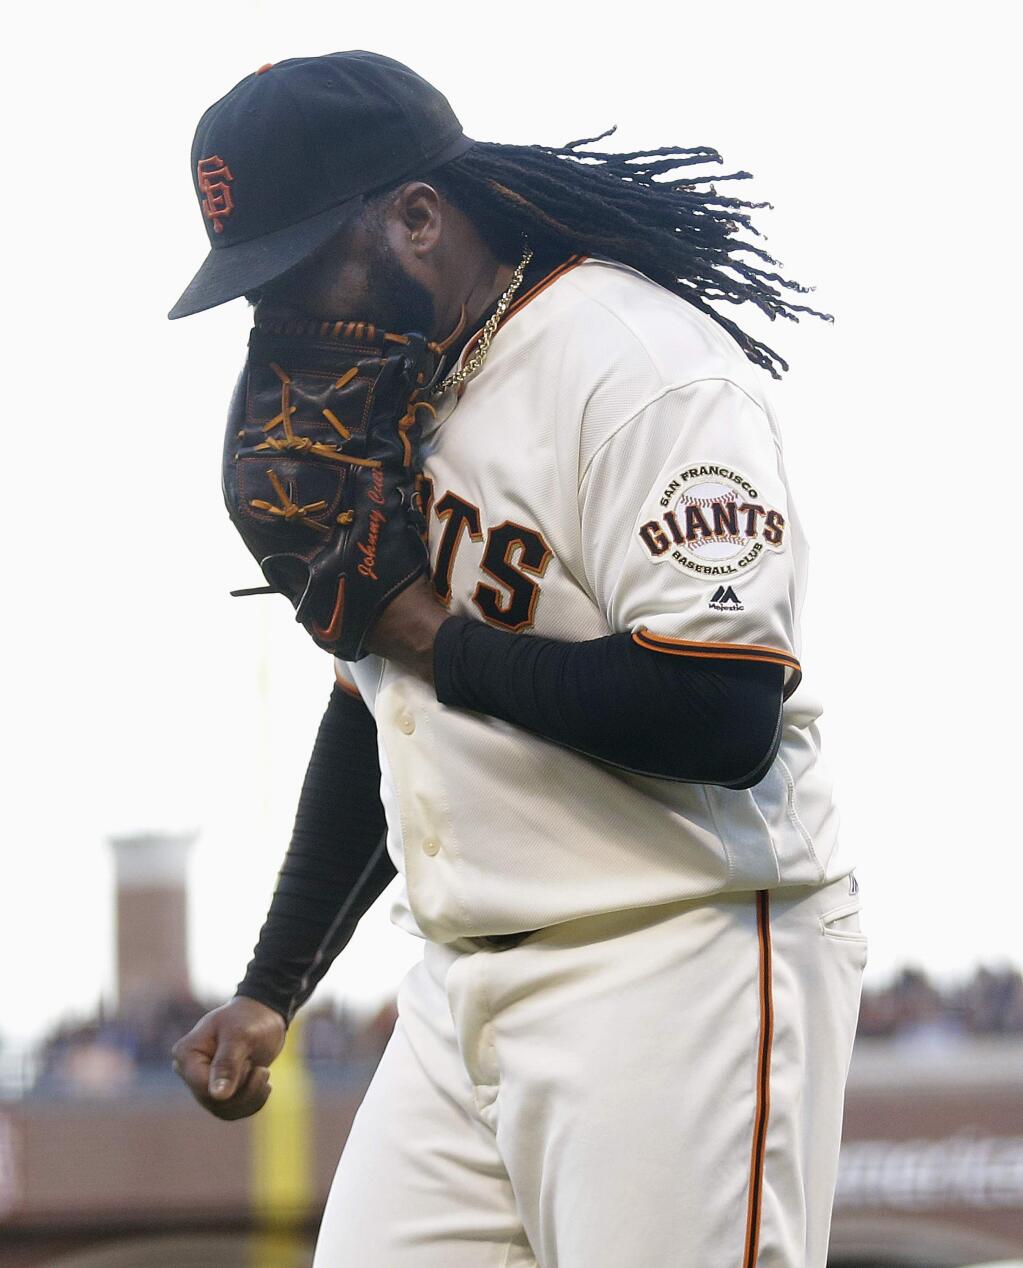 San Francisco Giants pitcher Johnny Cueto yells into his glove after Washington Nationals' Tanner Roark hit an RBI single during the second inning of a baseball game in San Francisco, Thursday, July 28, 2016. (AP Photo/Jeff Chiu)